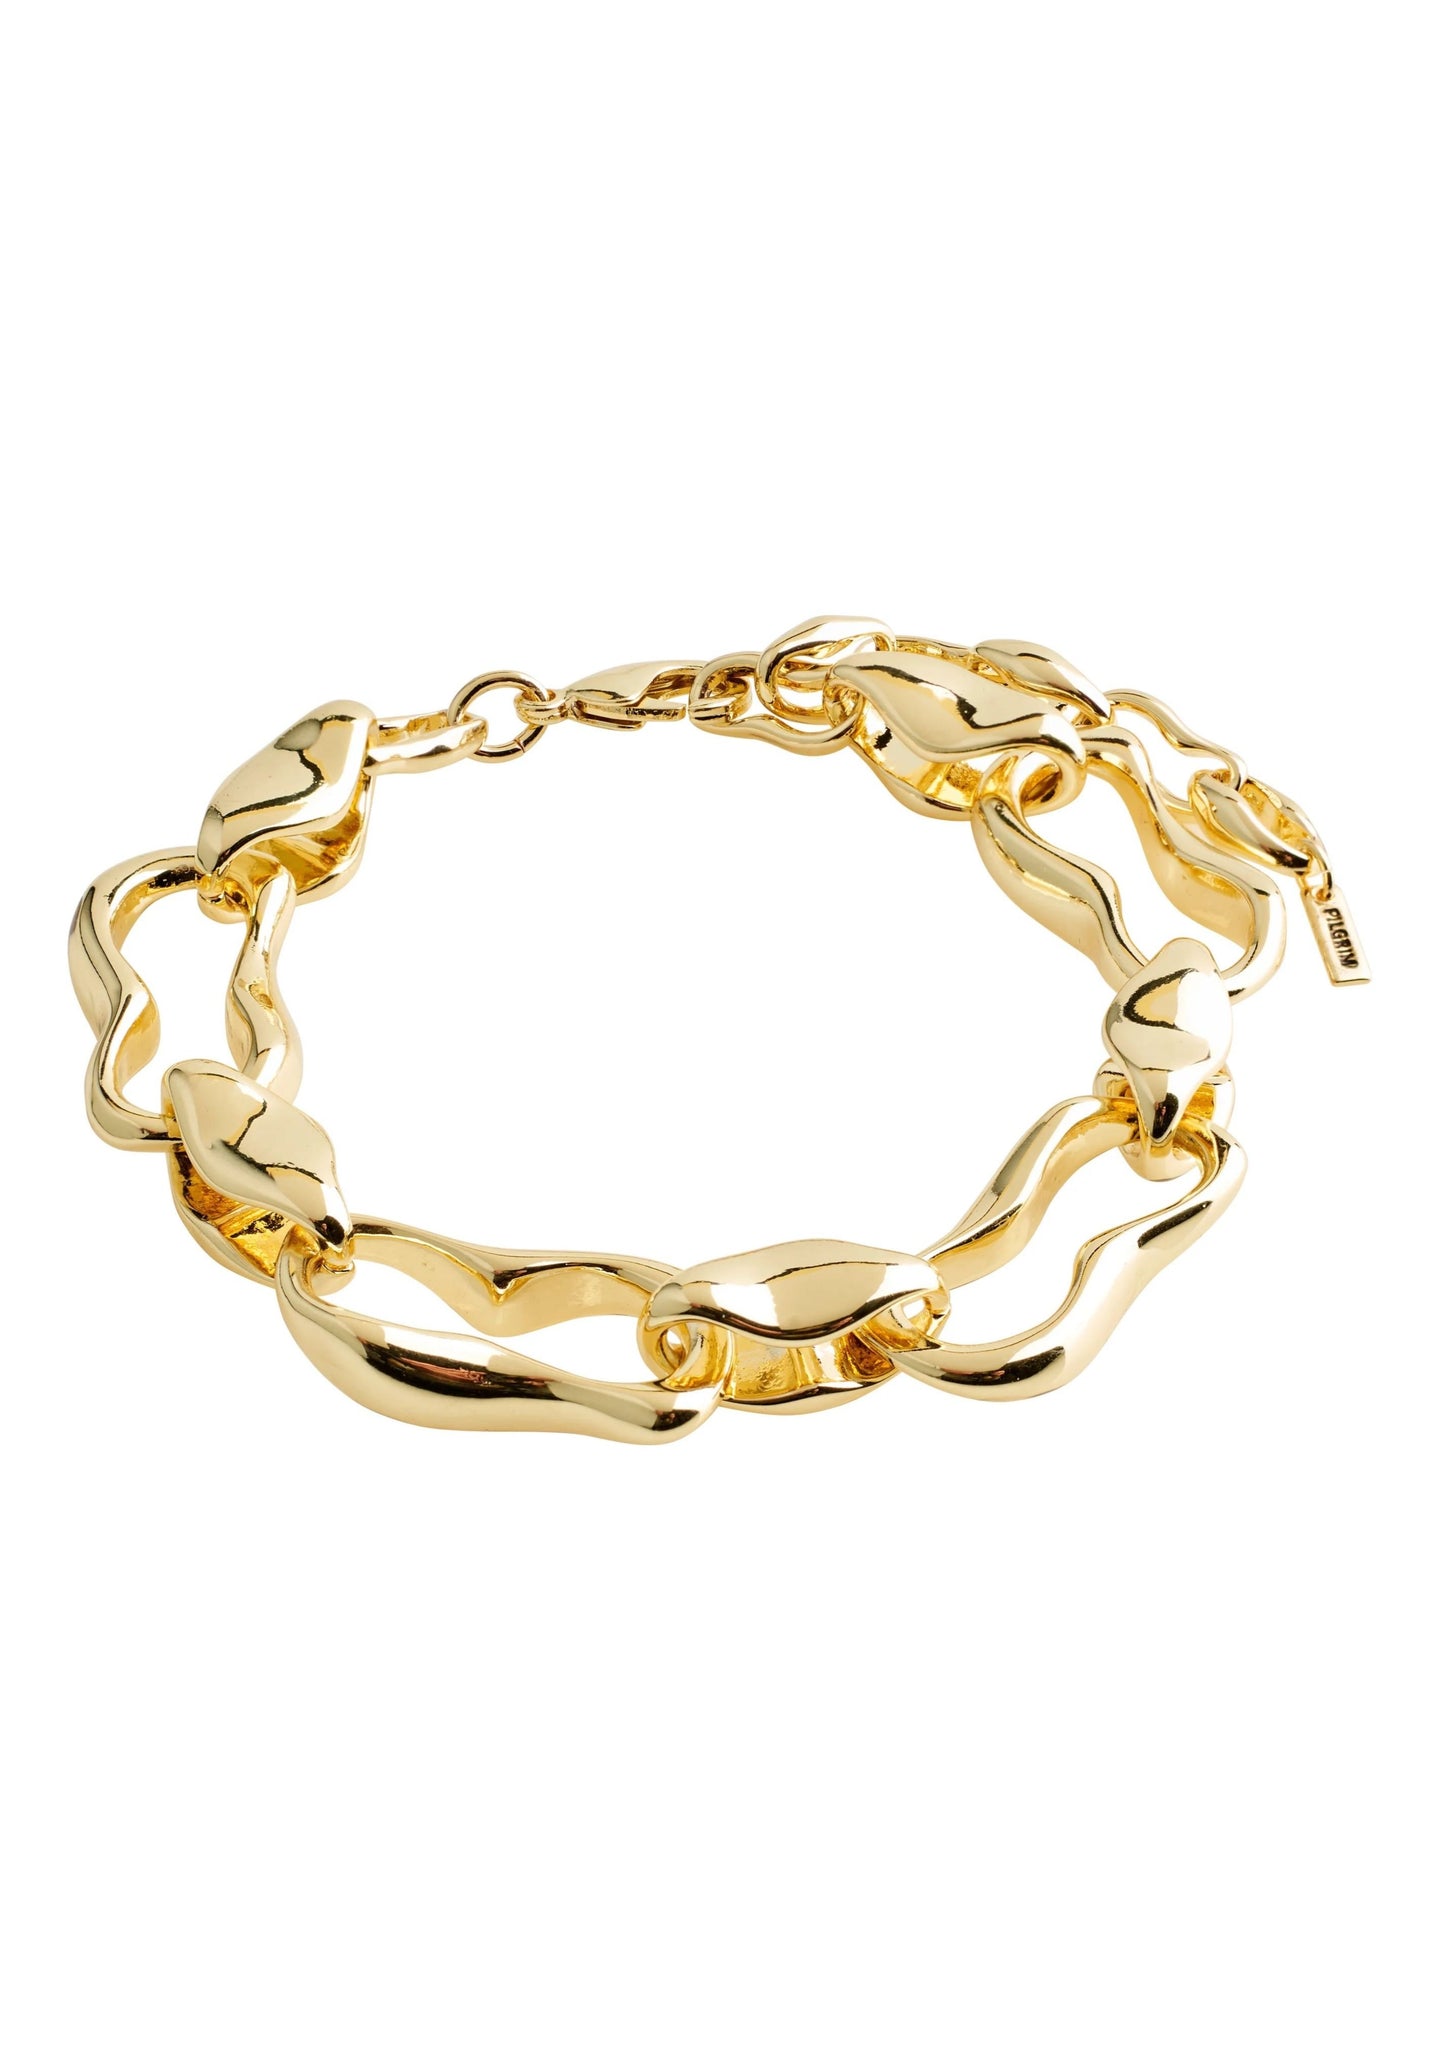 Wave Recycled Bracelet - Gold Plated, by Pilgrim Listen to the waves! Get inspired by Pilgrim's bracelets from the Wave series, with a strong, urban feel. A gold-plated bracelet formed of chunky links in a unique organically shaped design. The bangle has a shiny finish and a heavy quality feel that offers you a feeling of power and confidence. The bracelet is made by min. 75% recycled material.